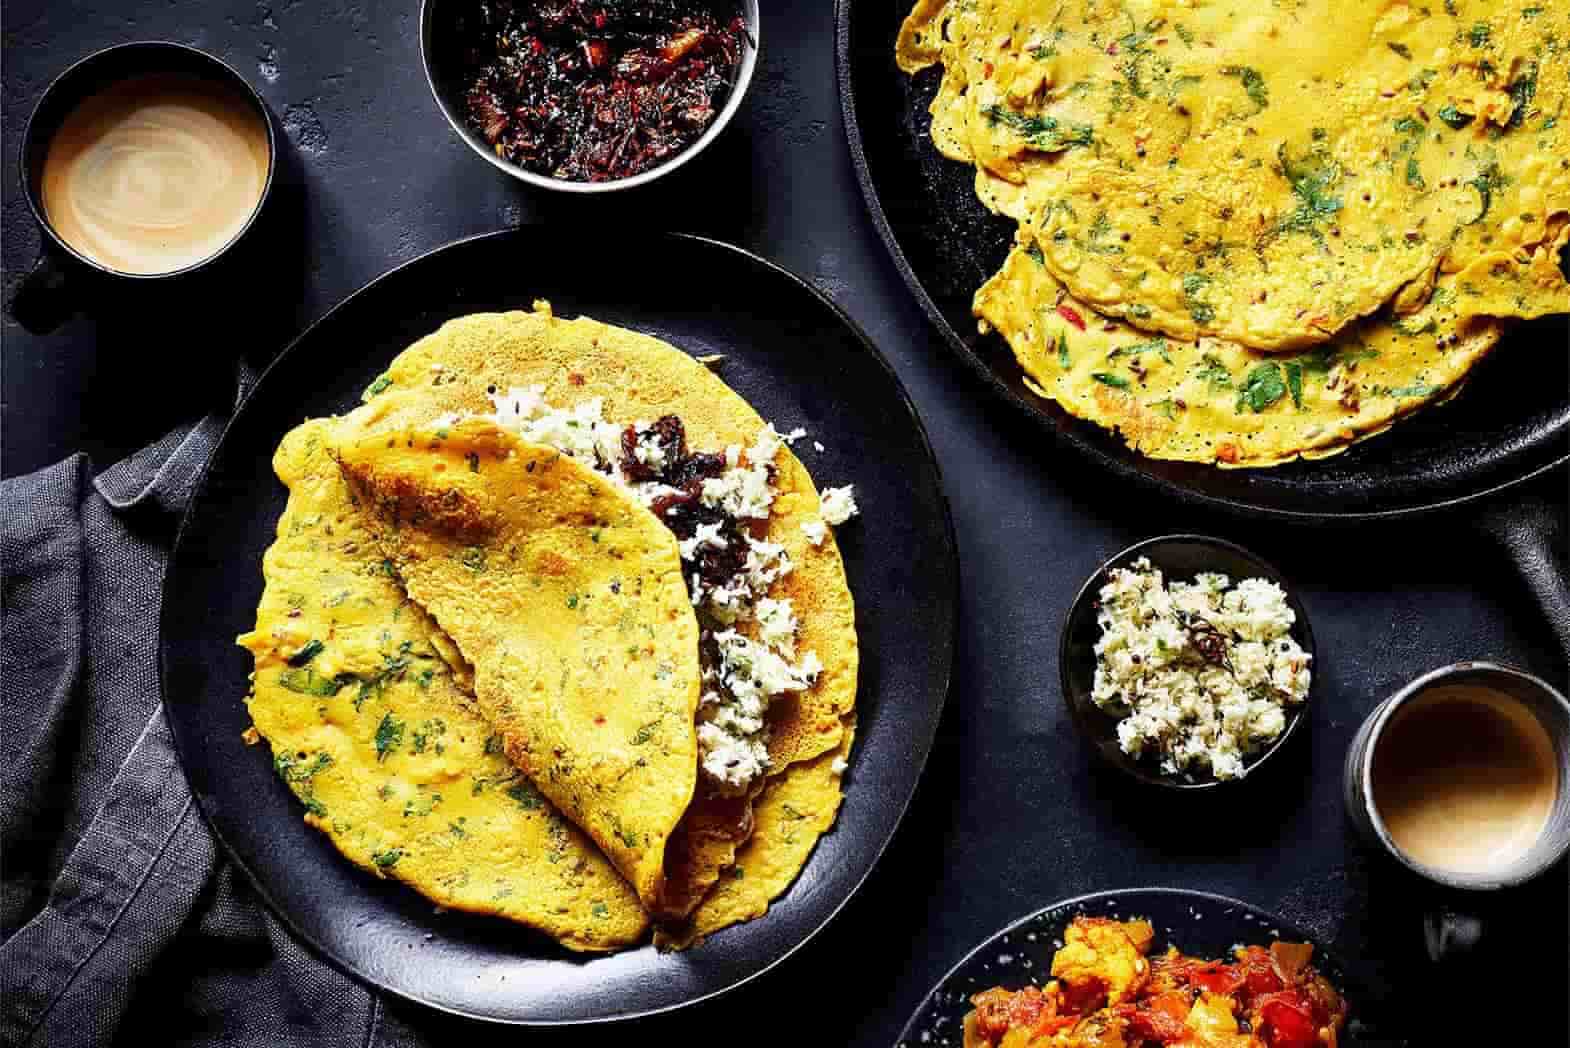 recipe for spiced crepe with coconut chutney